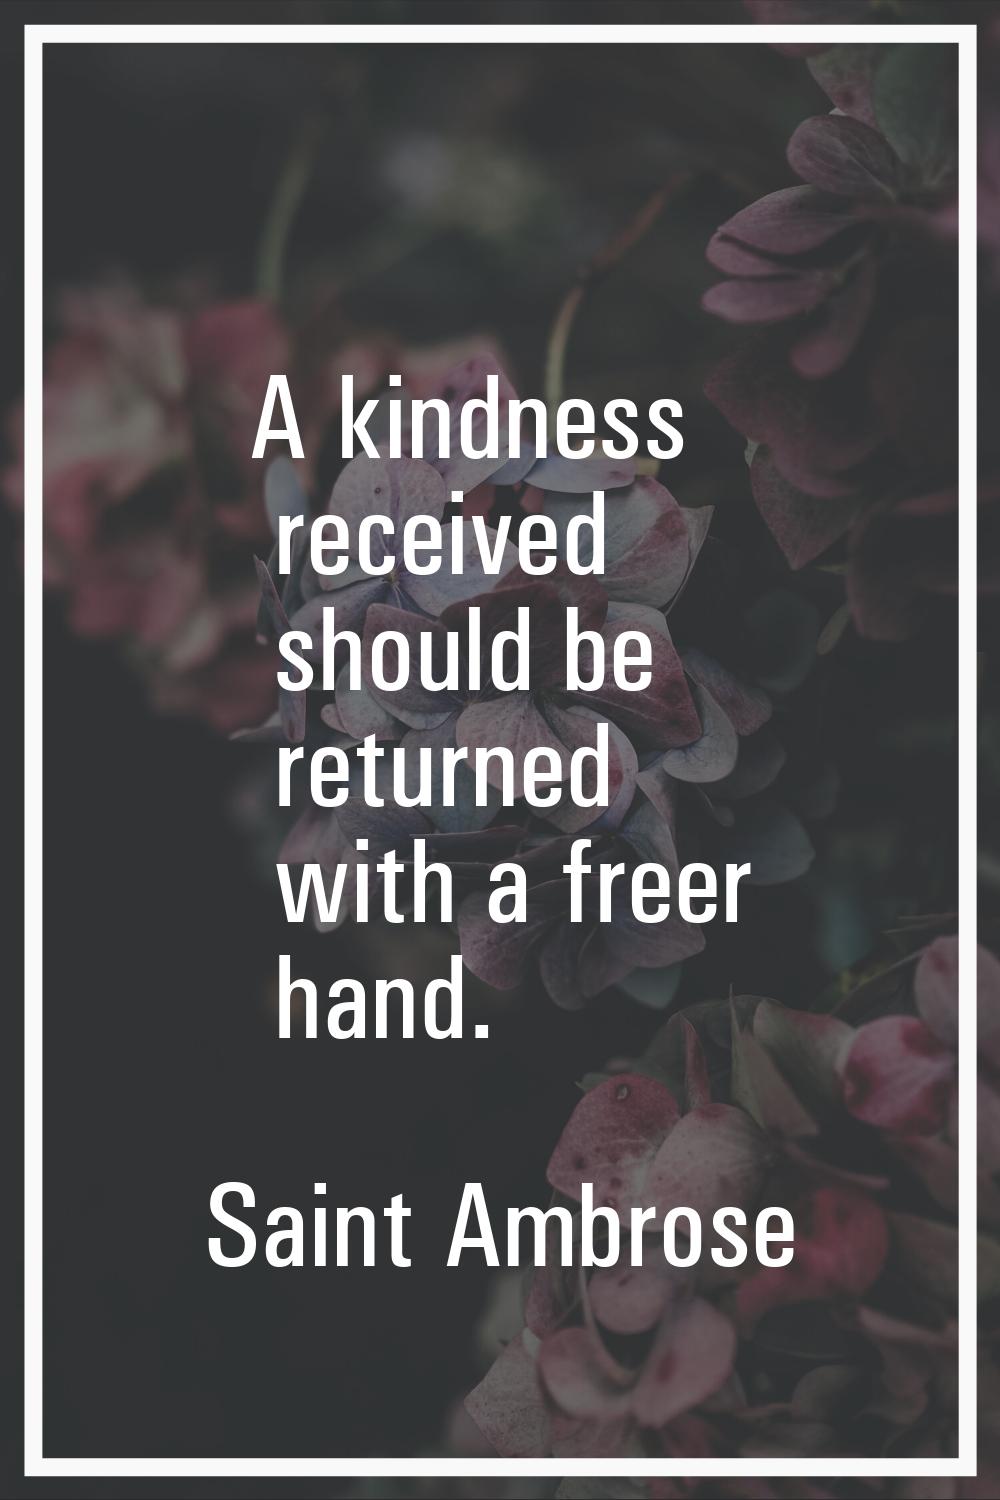 A kindness received should be returned with a freer hand.